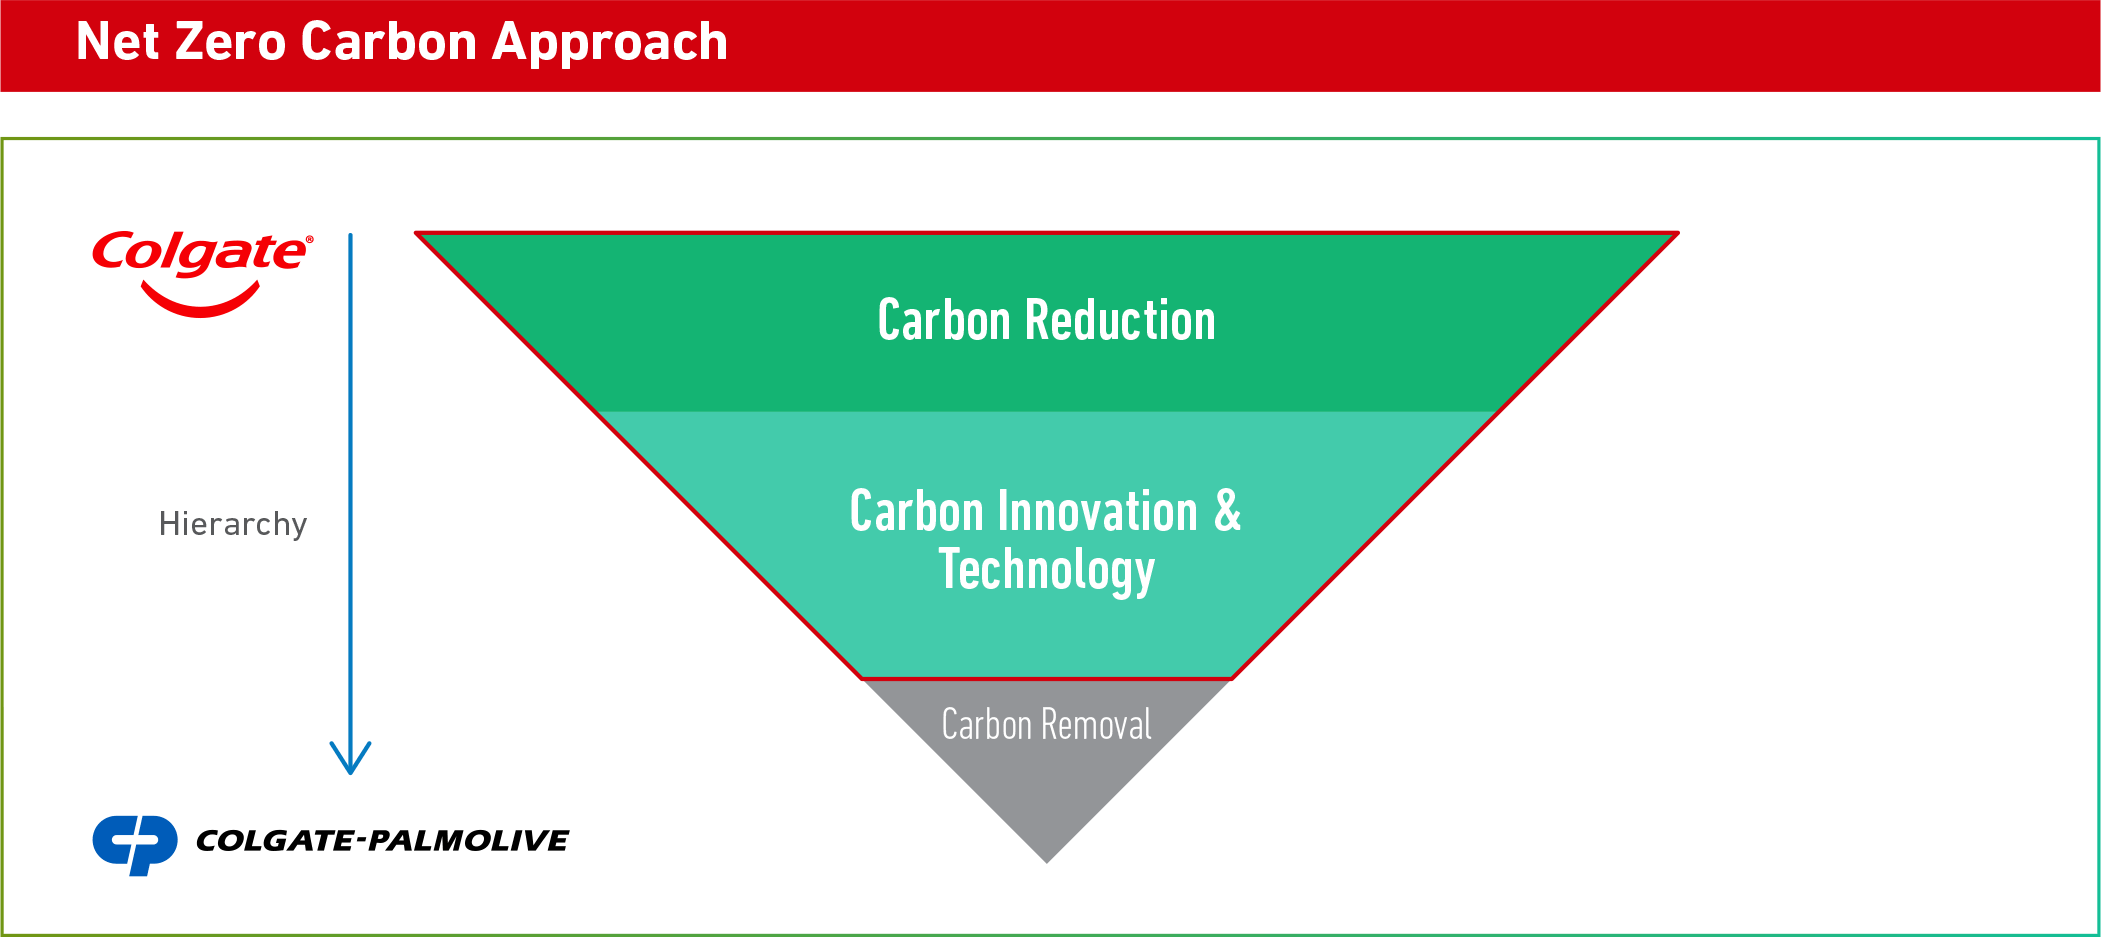 Colgate-Palmolive net zero carbon approach to climate action strategy